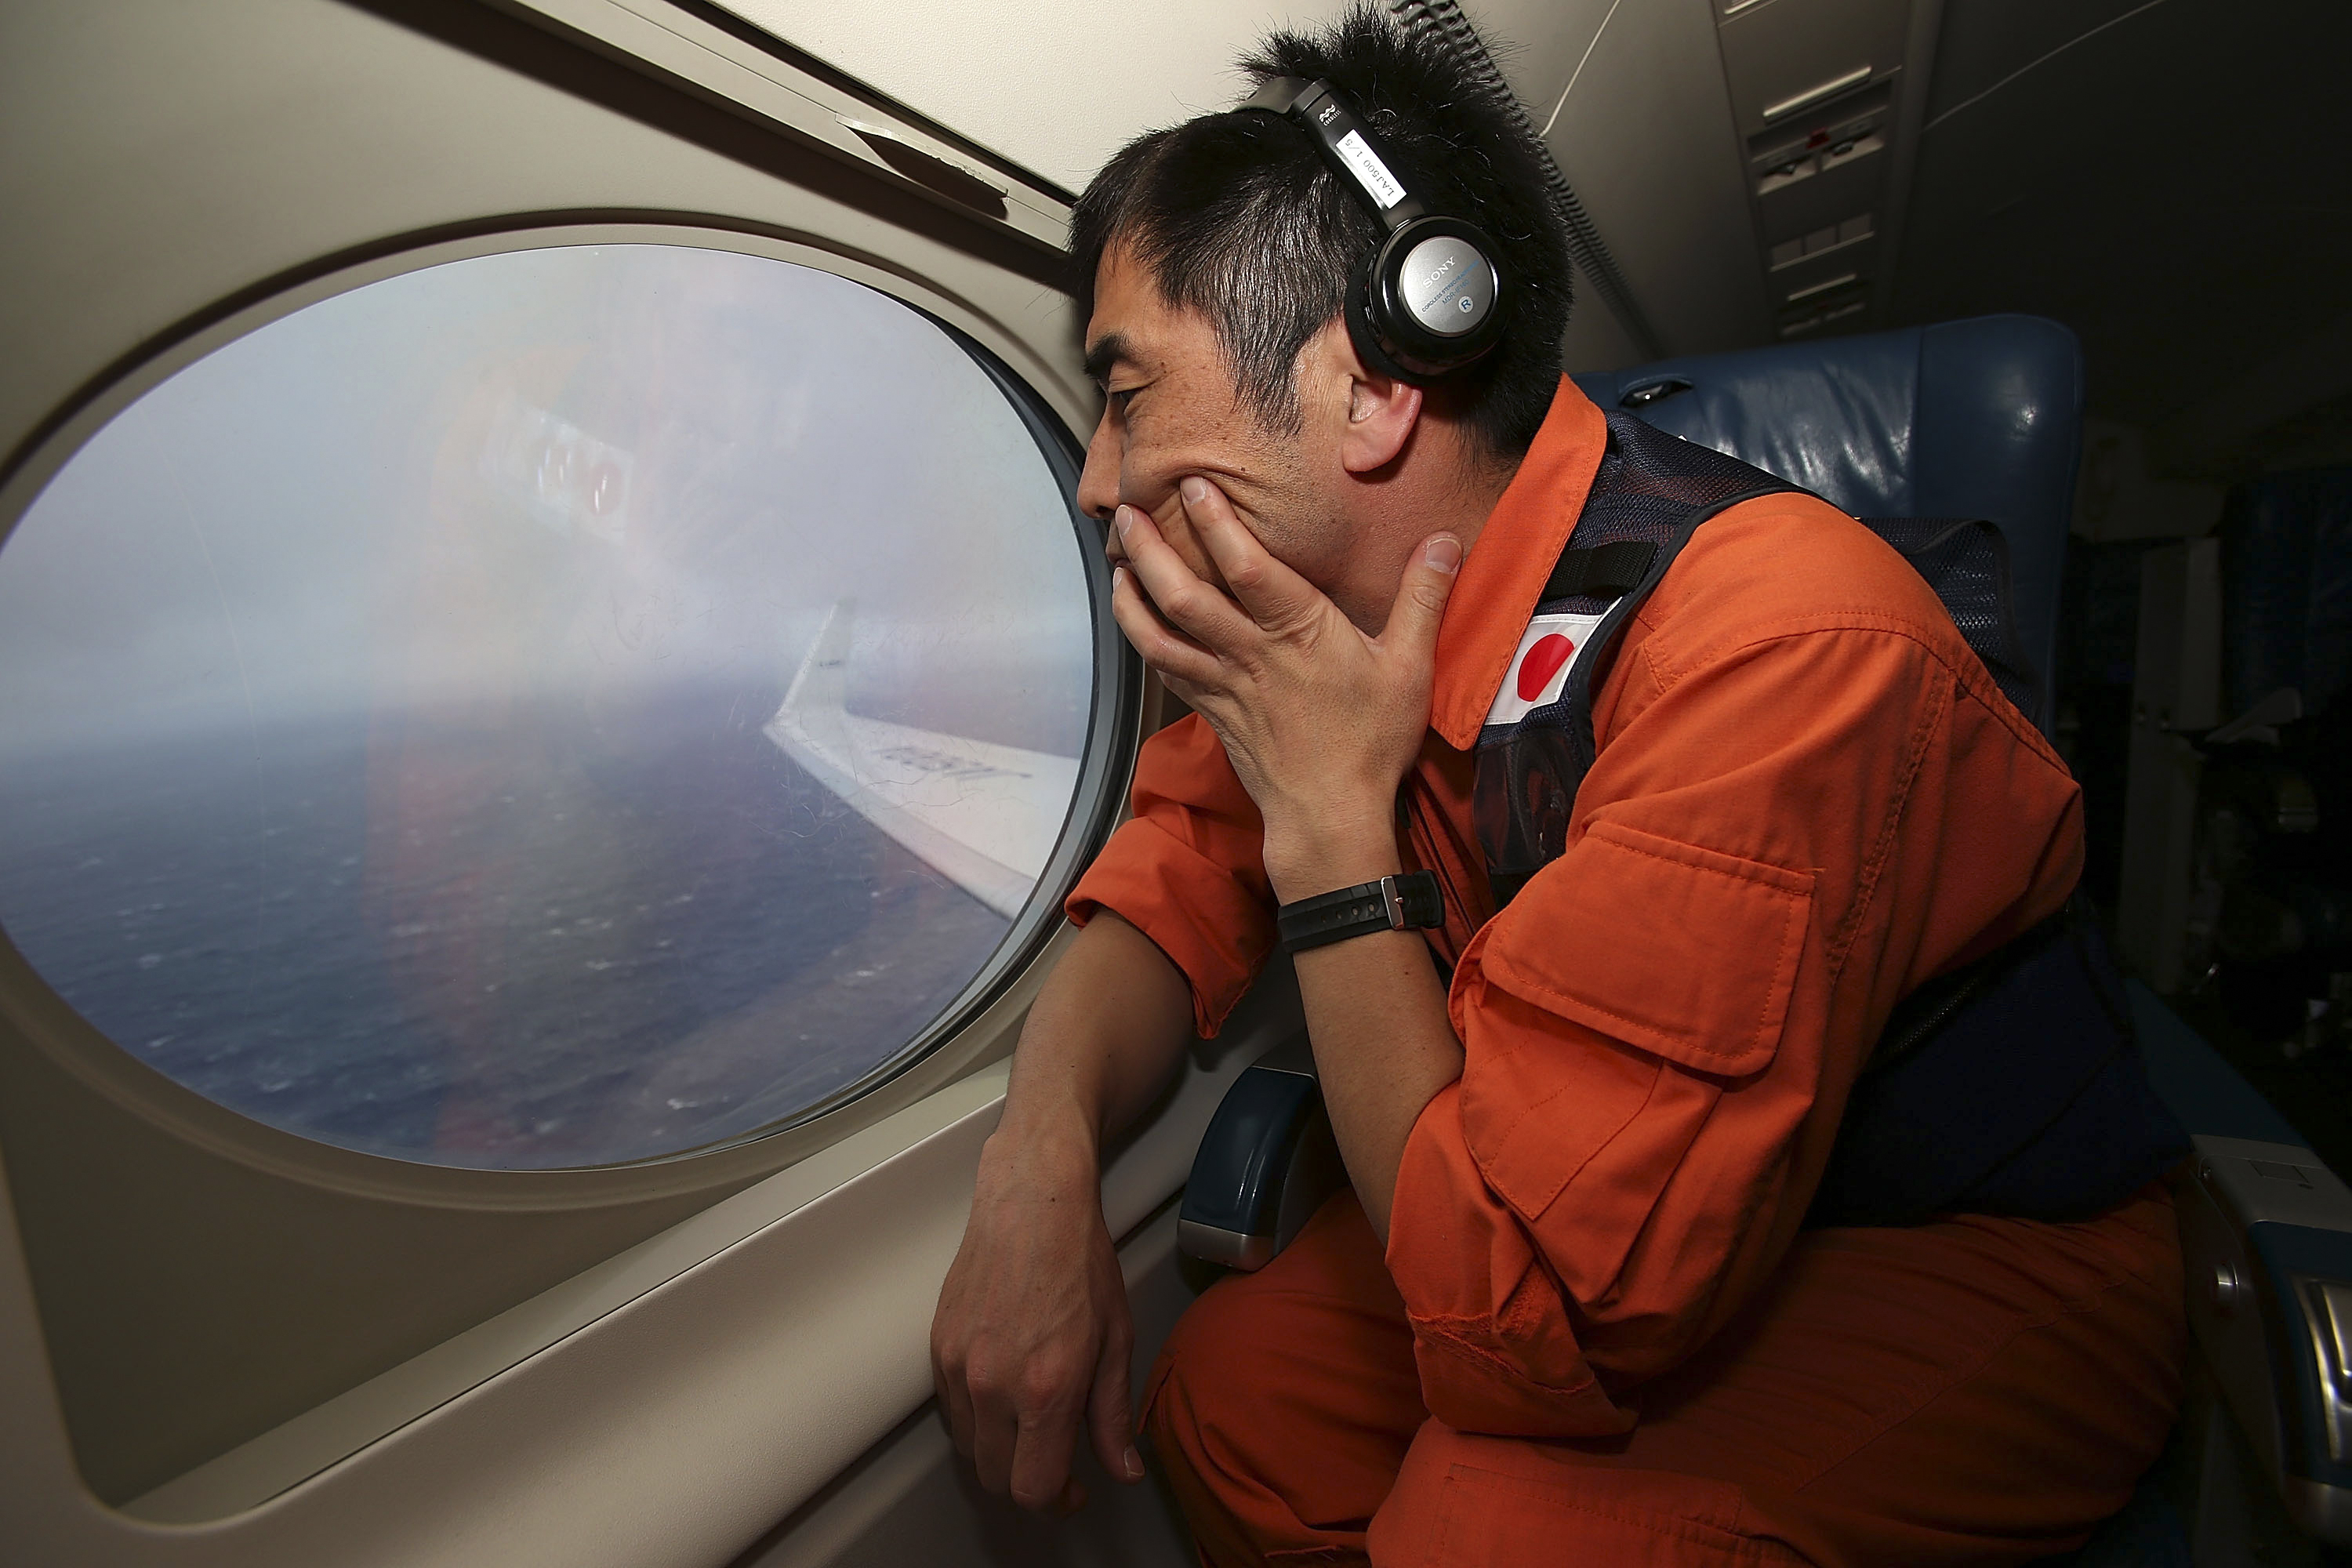 Malaysia Airlines Flight 370 investigation "may go on and on and on